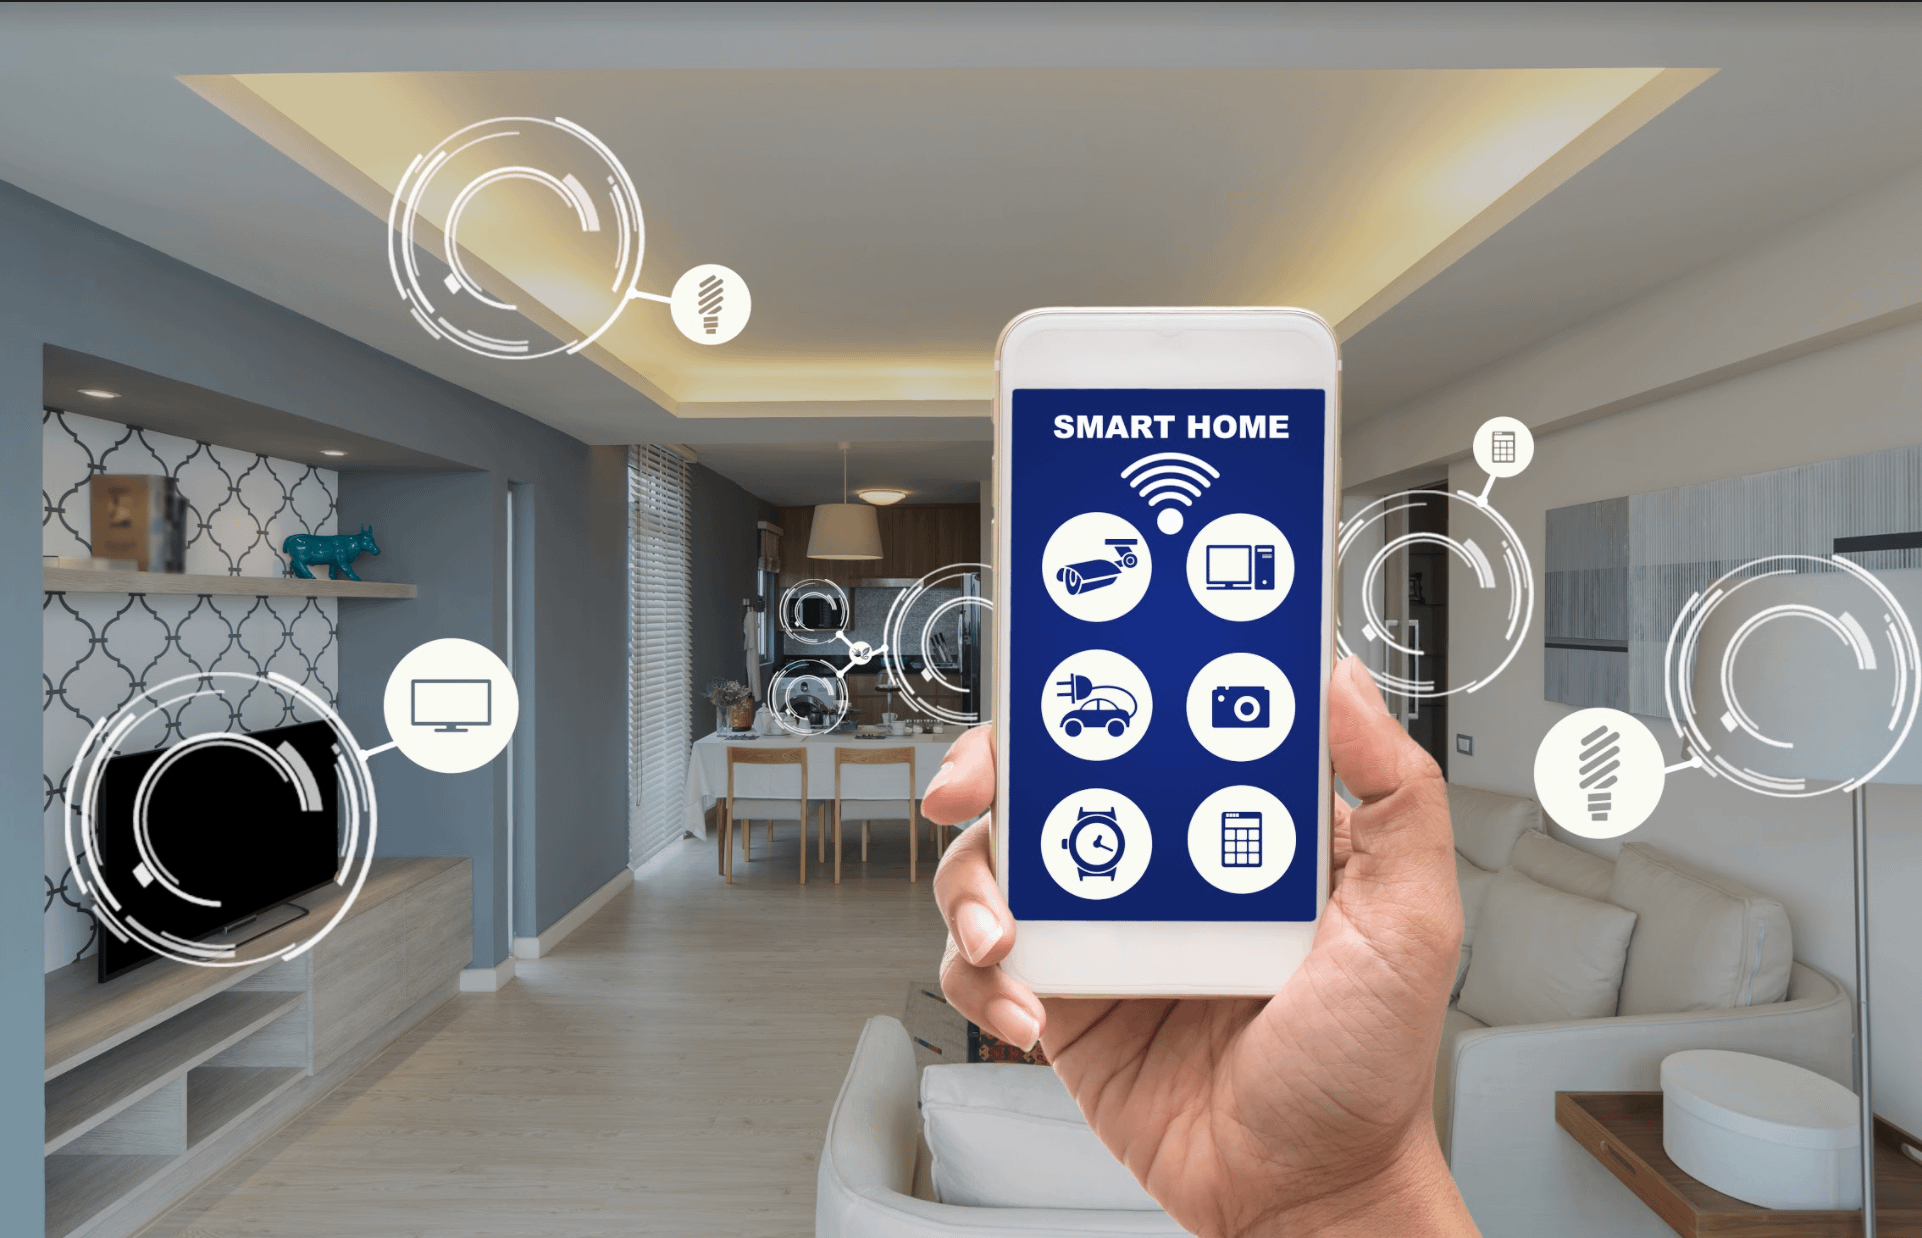 Smart Home - Future Of Smart Home Devices